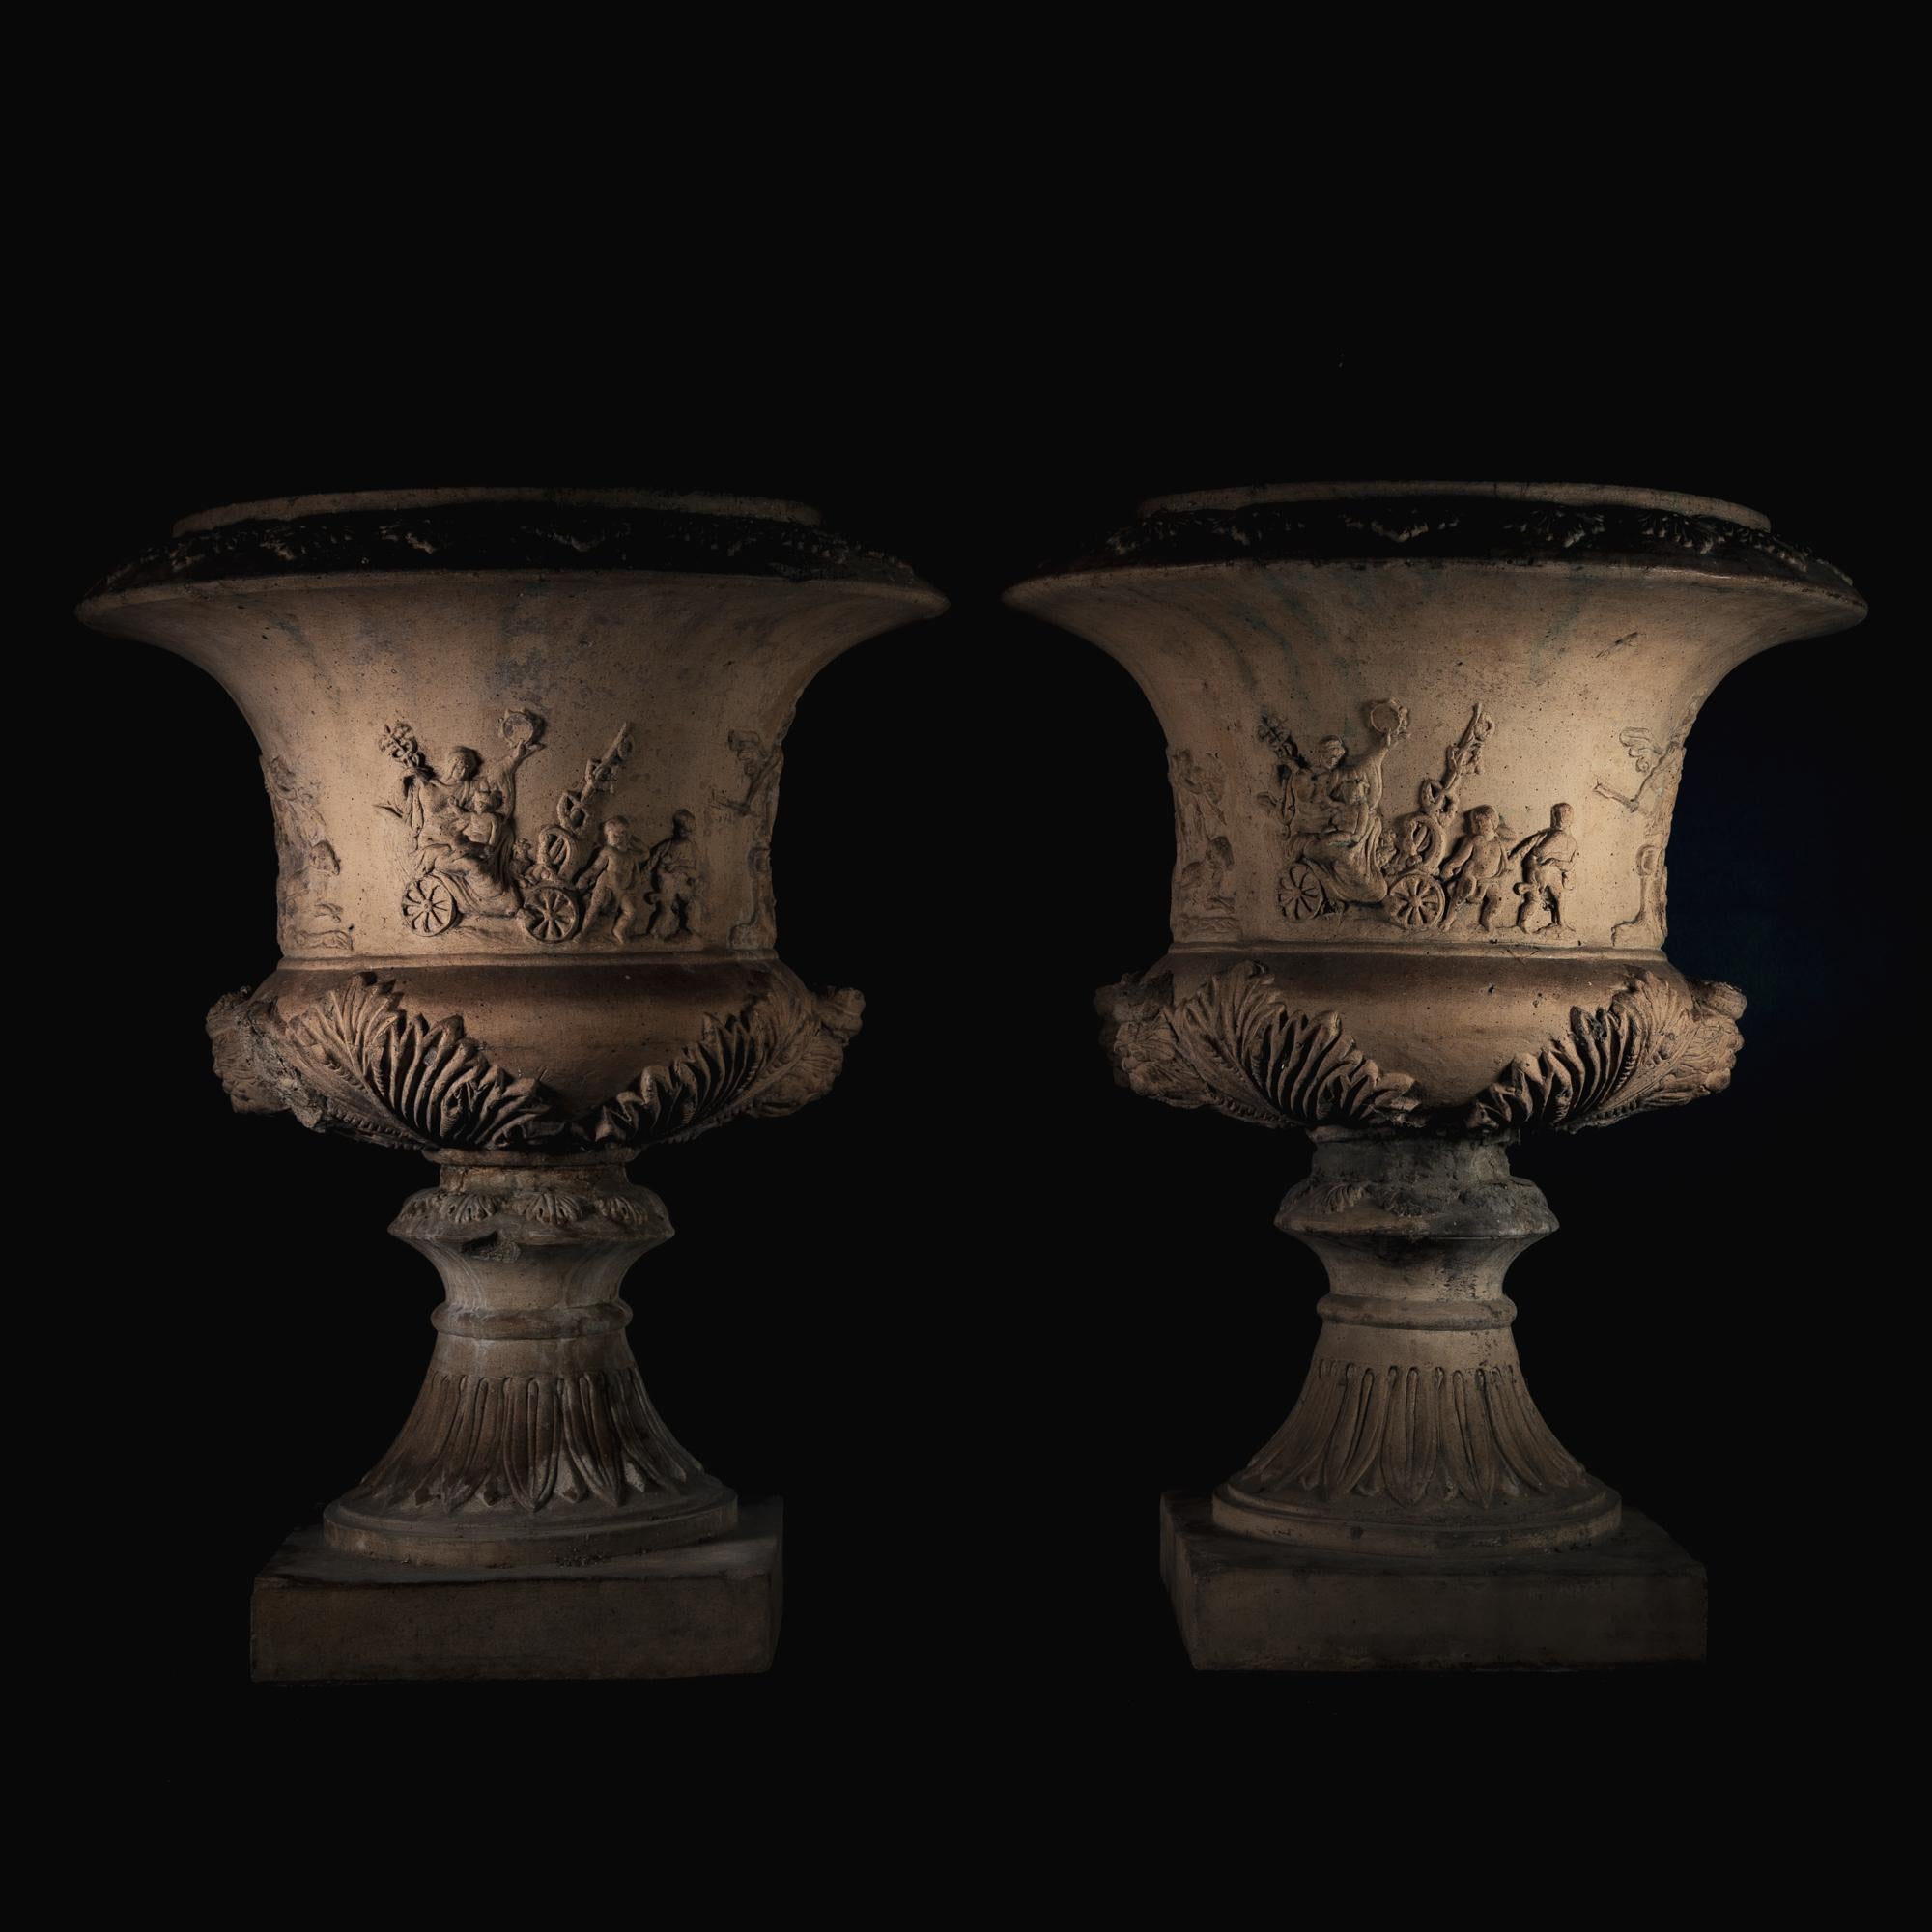 Terracotta Crater Vases, Italy 2nd Half 19th Century For Sale 5